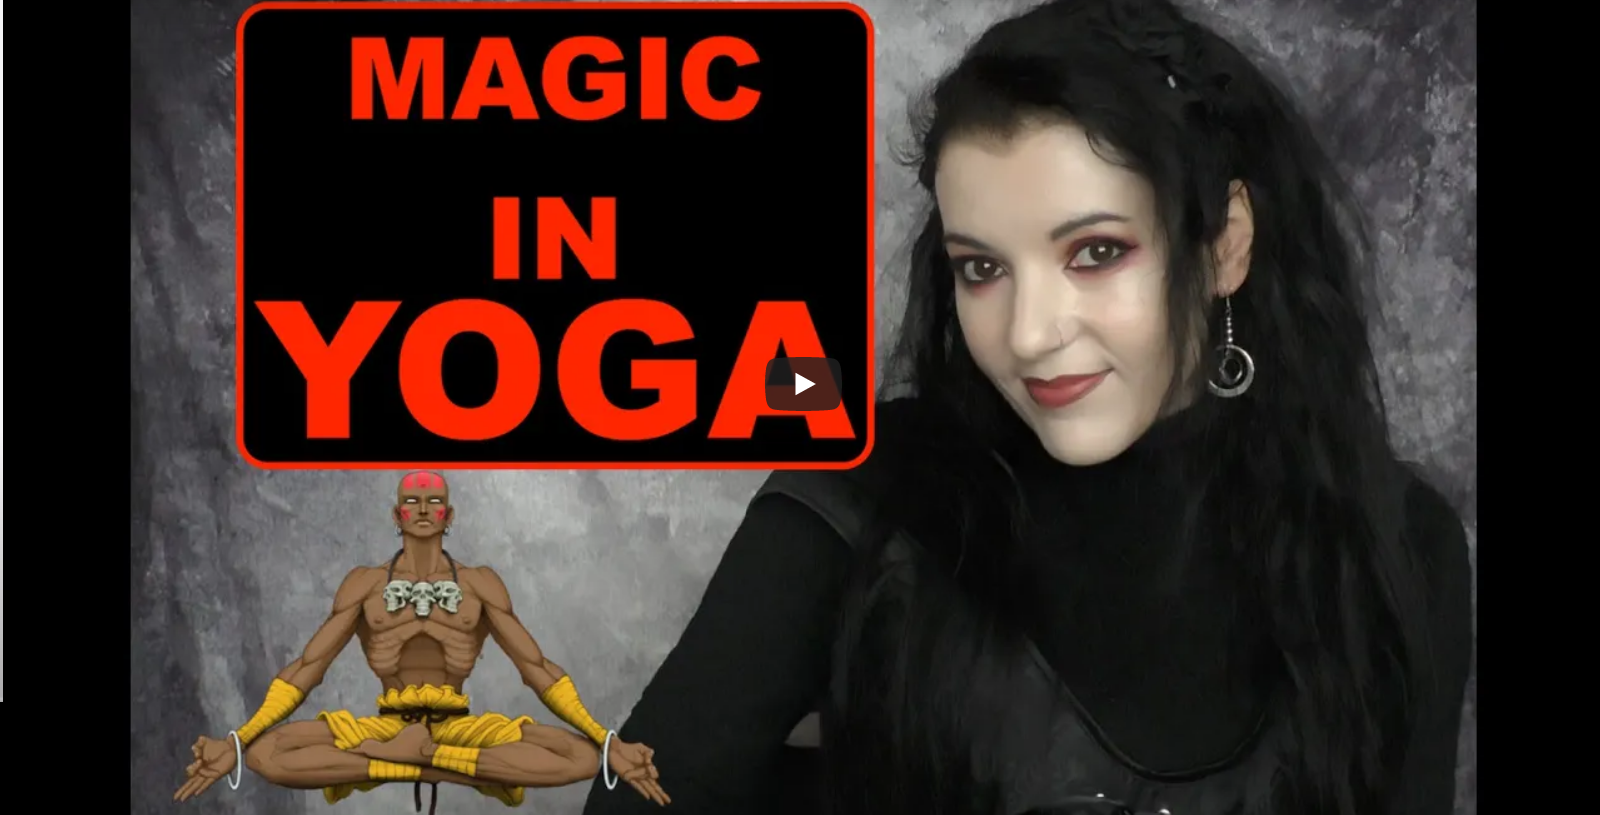 Angela Puca with a sign 'Magic in Yoga' and a picture of a yogin